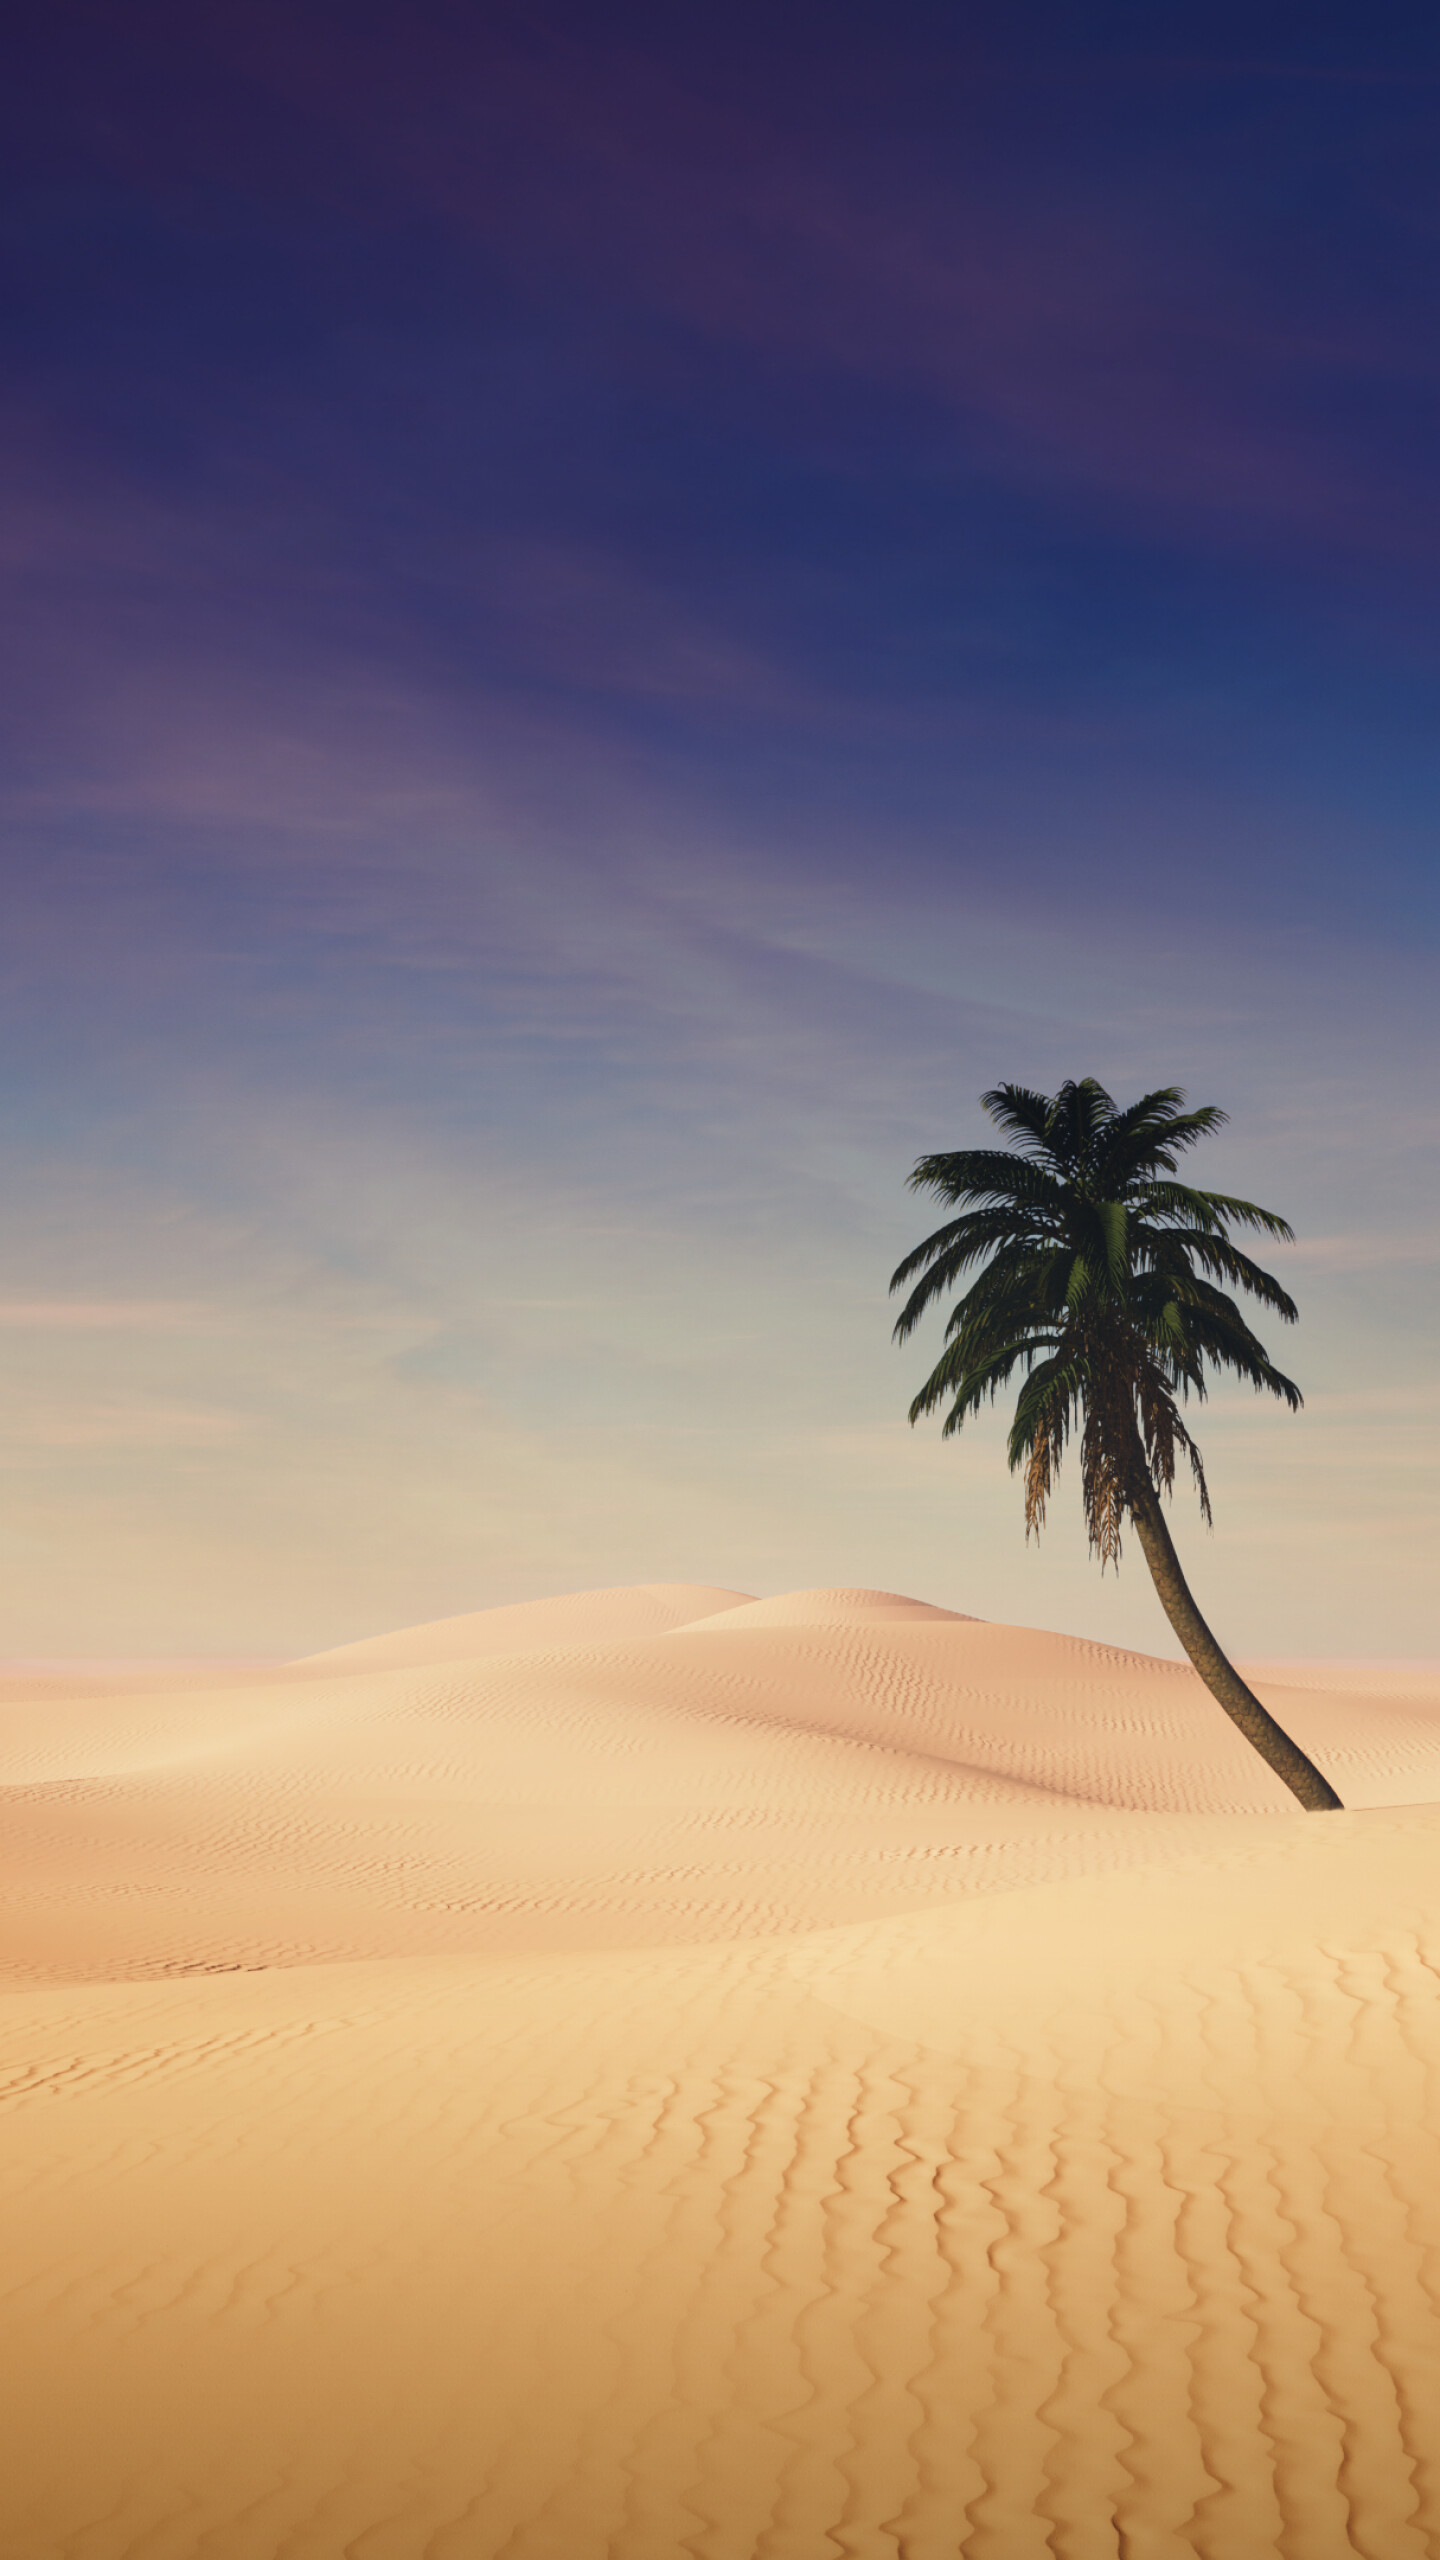 Palm Tree: Plant of the family Palmae having an unbranched trunk crowned by large pinnate or palmate leaves. 1440x2560 HD Wallpaper.